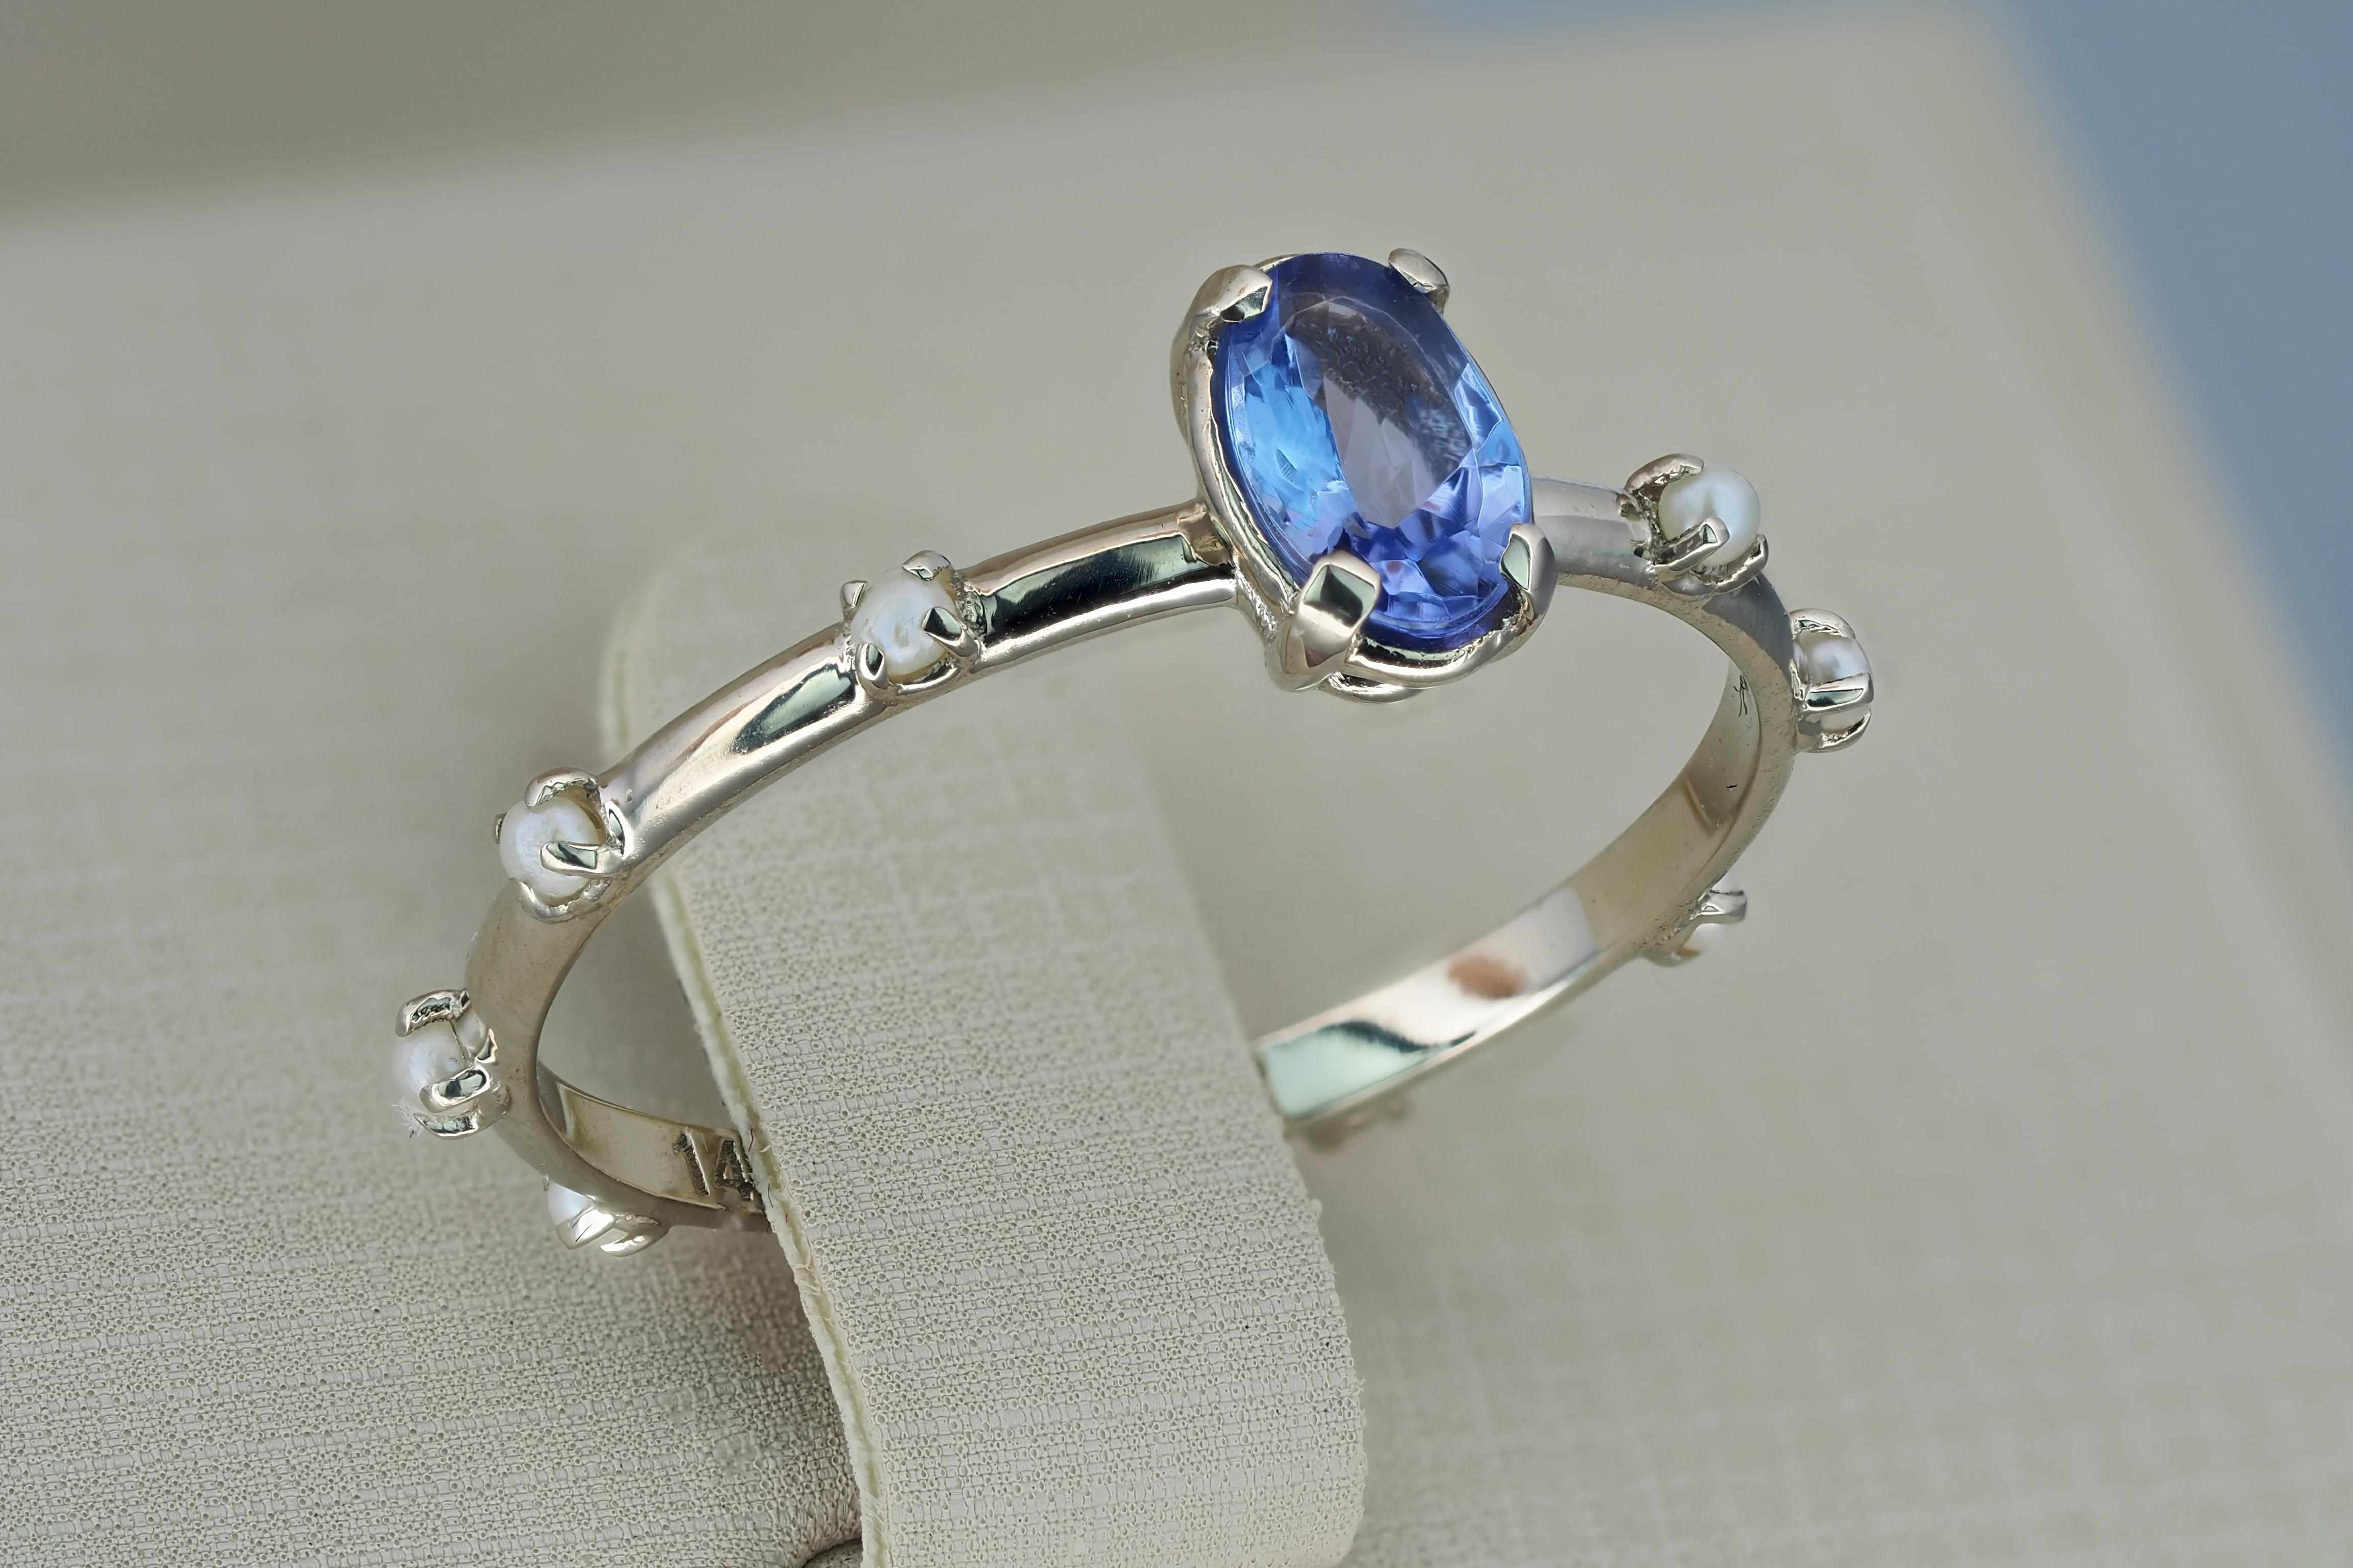 For Sale:  Tanzanite and pearls 14k gold ring. Real tanzanite gold ring.  3